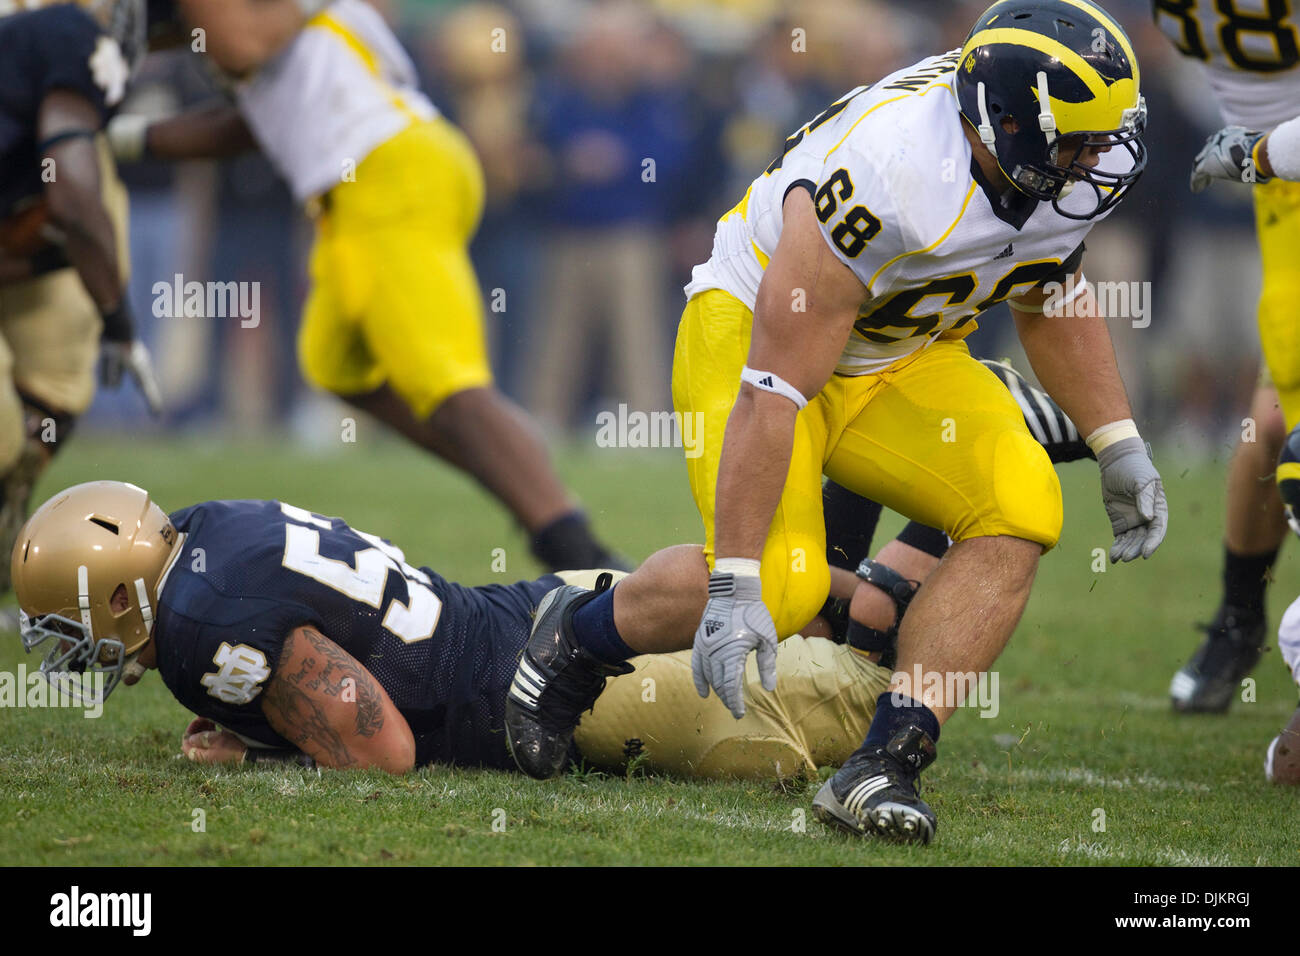 Sept. 11, 2010 - South Bend, Indiana, United States of America - Notre Dame center Braxston Cave (#52) and Michigan defensive tackle Alex Schwab (#68) during NCAA football game between the Notre Dame Fighting Irish and the Michigan Wolverines.  Michigan defeated Notre Dame 28-24 in game at Notre Dame Stadium in South Bend, Indiana. (Credit Image: © John Mersits/Southcreek Global/ZU Stock Photo